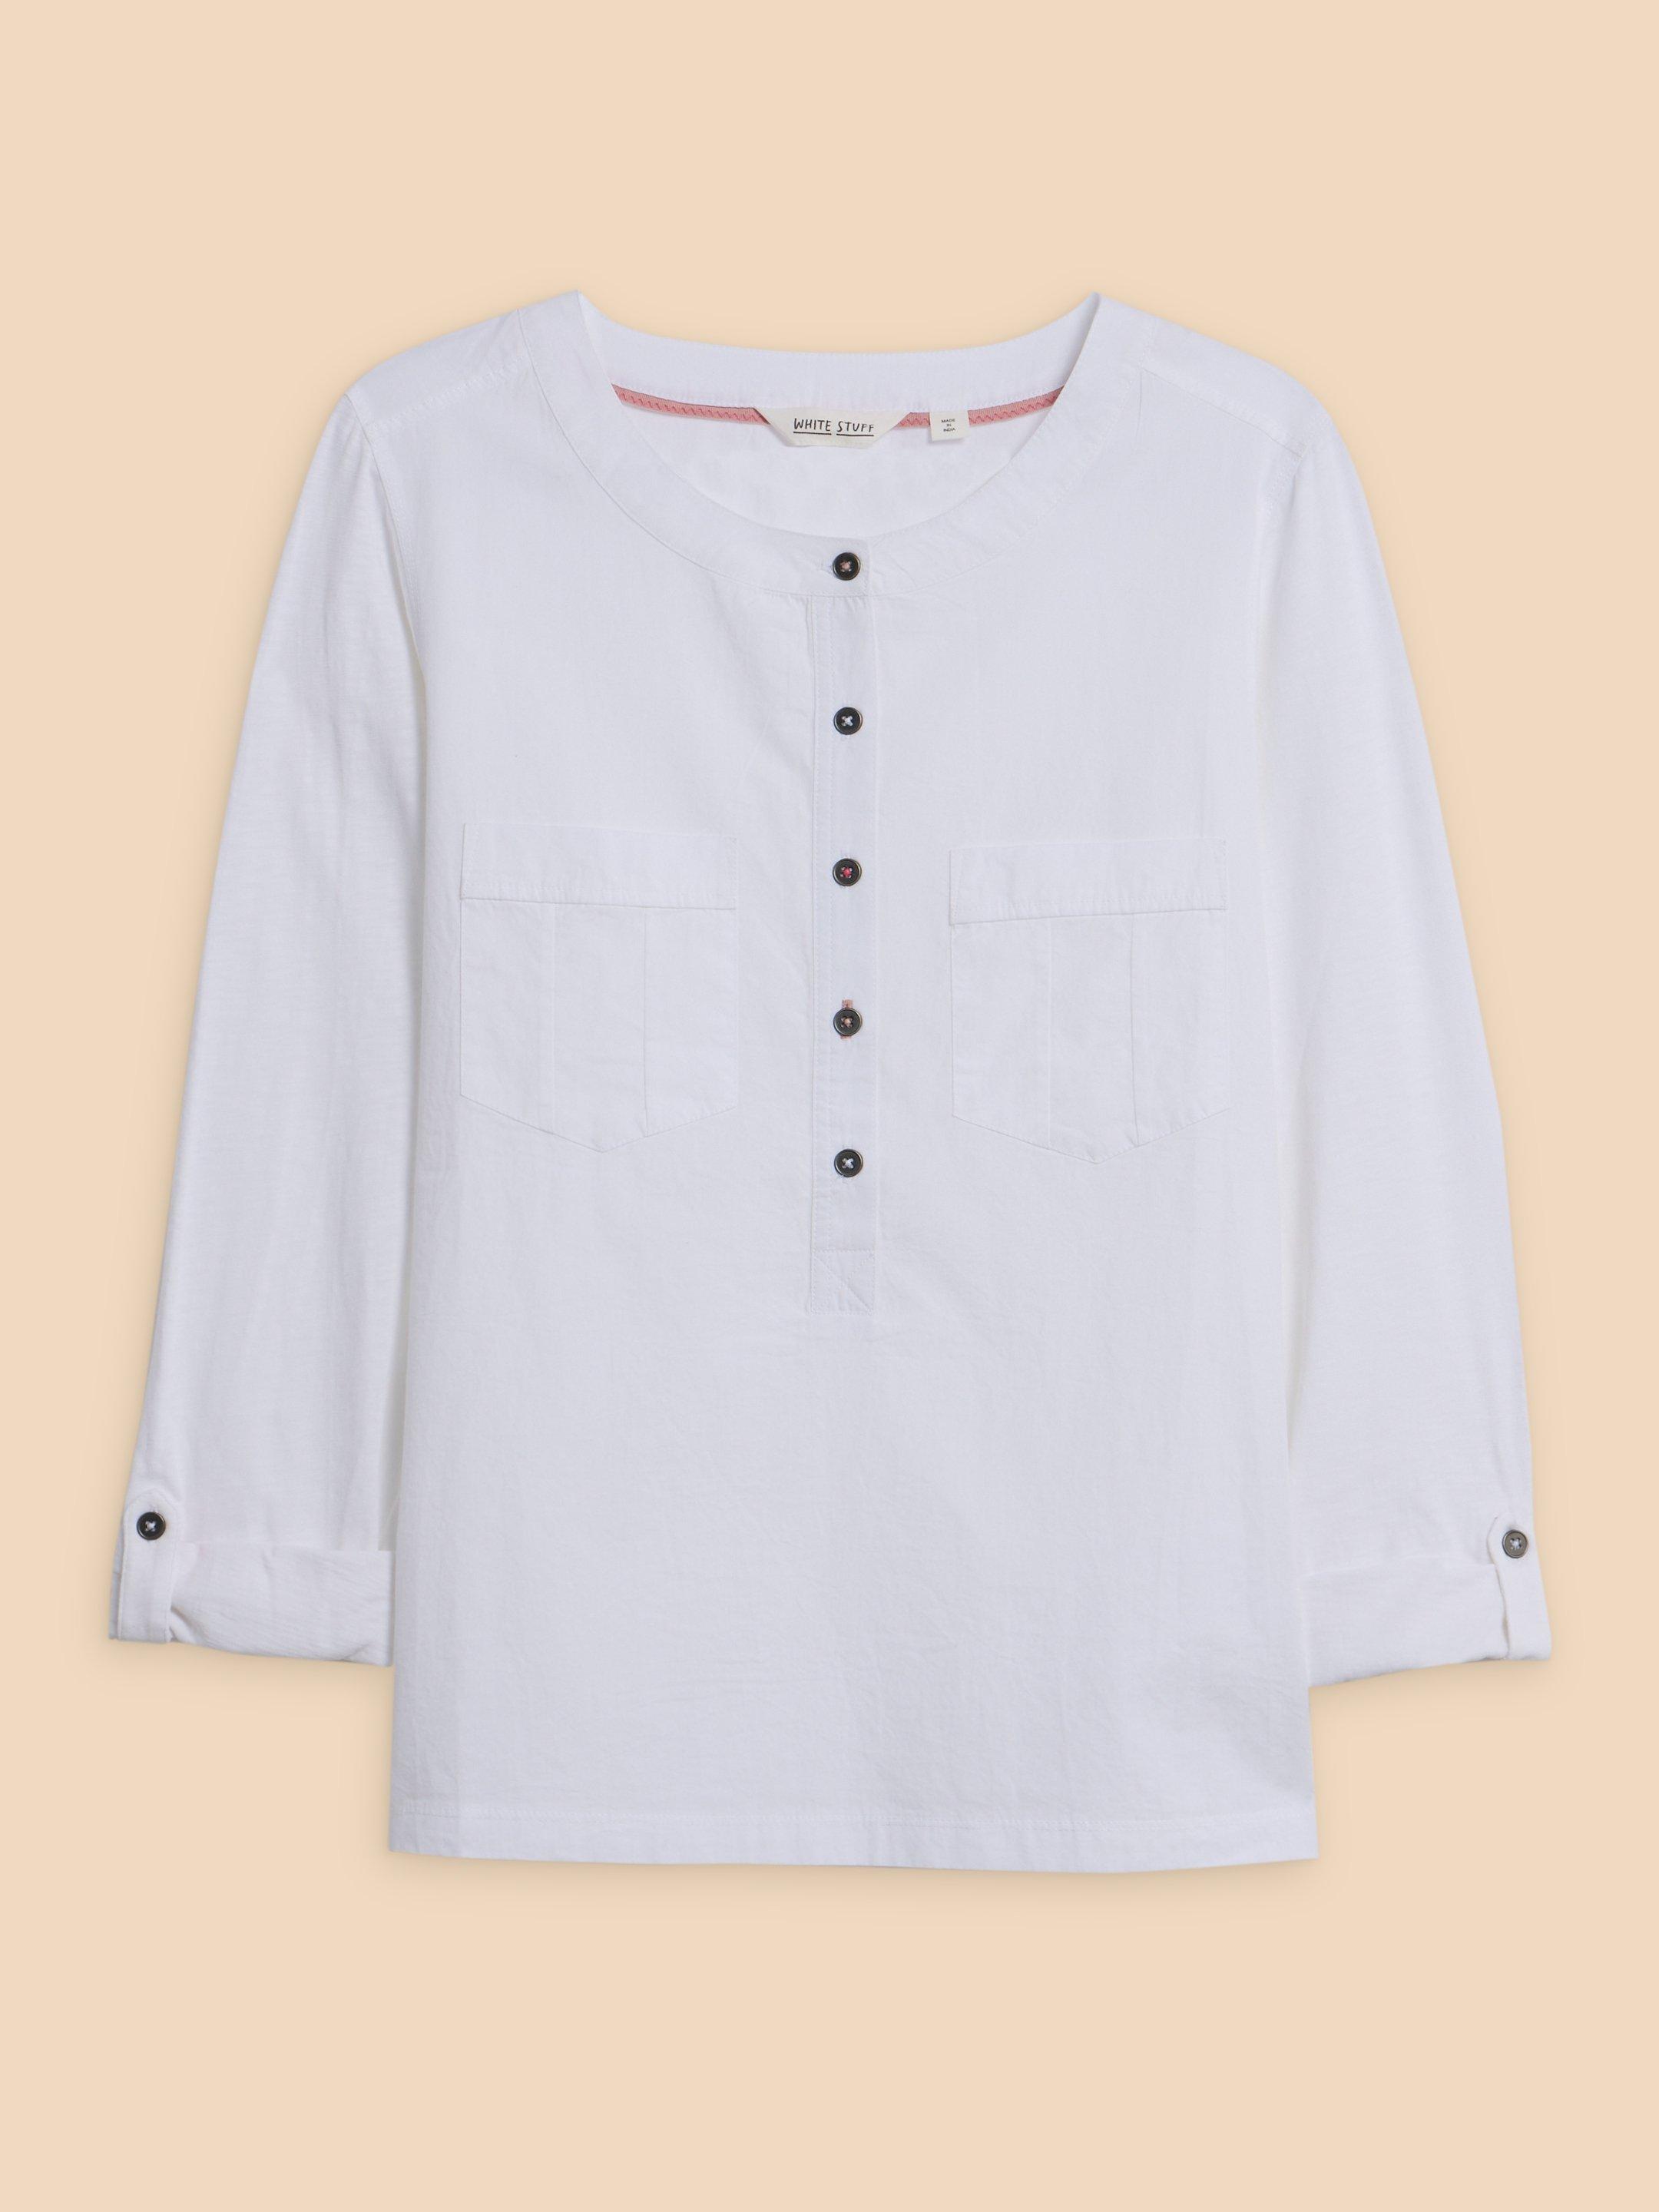 MACLEY MIX SHIRT in PALE IVORY - FLAT FRONT